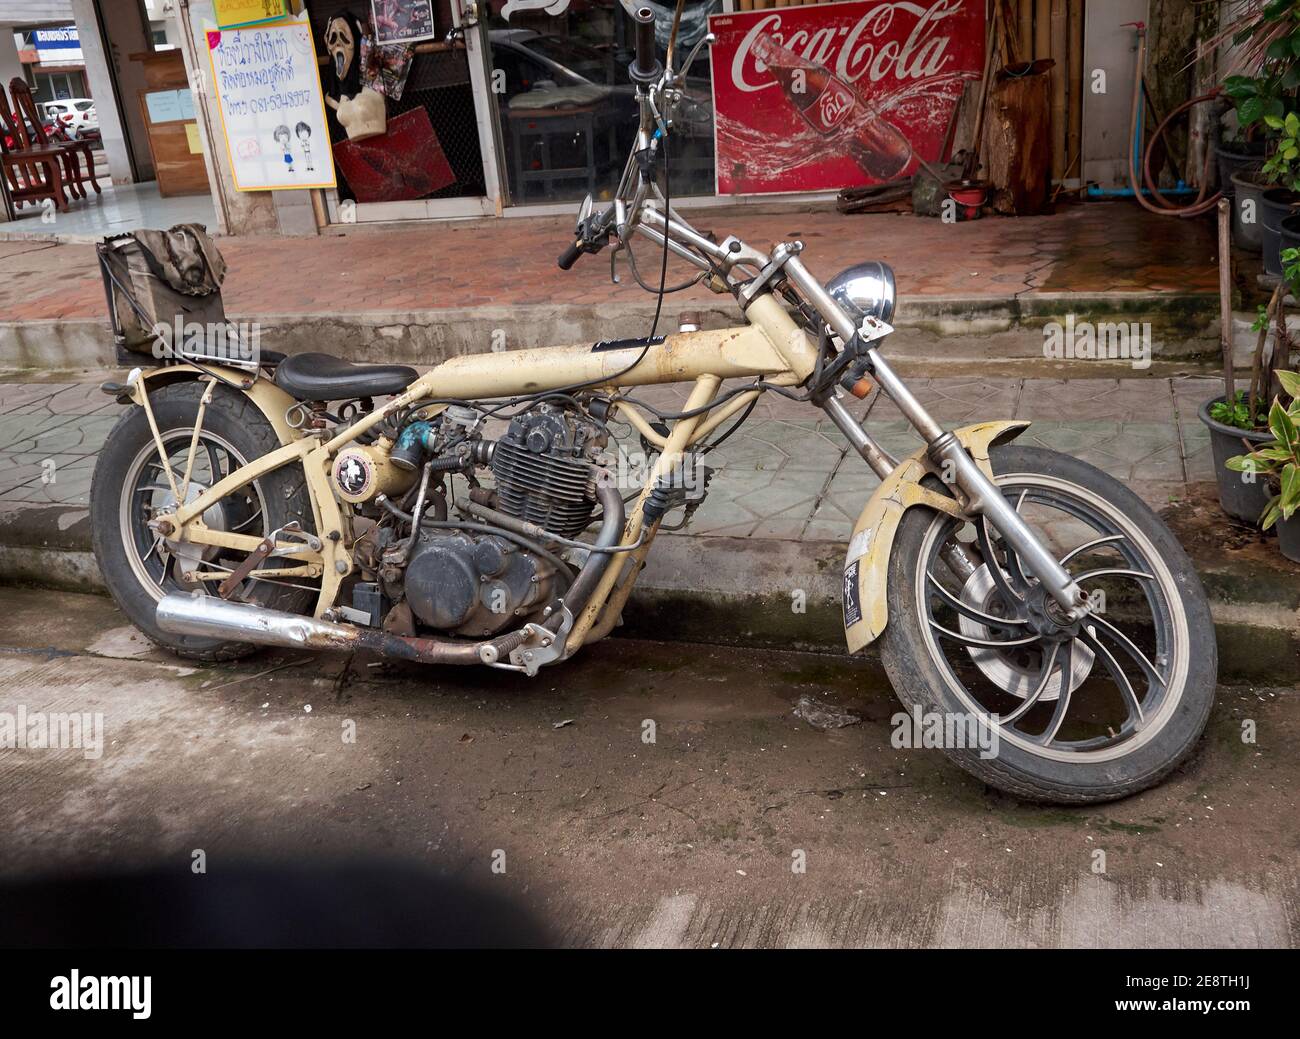 A unique and rare modified motorcycle parked by the side of the road Stock Photo